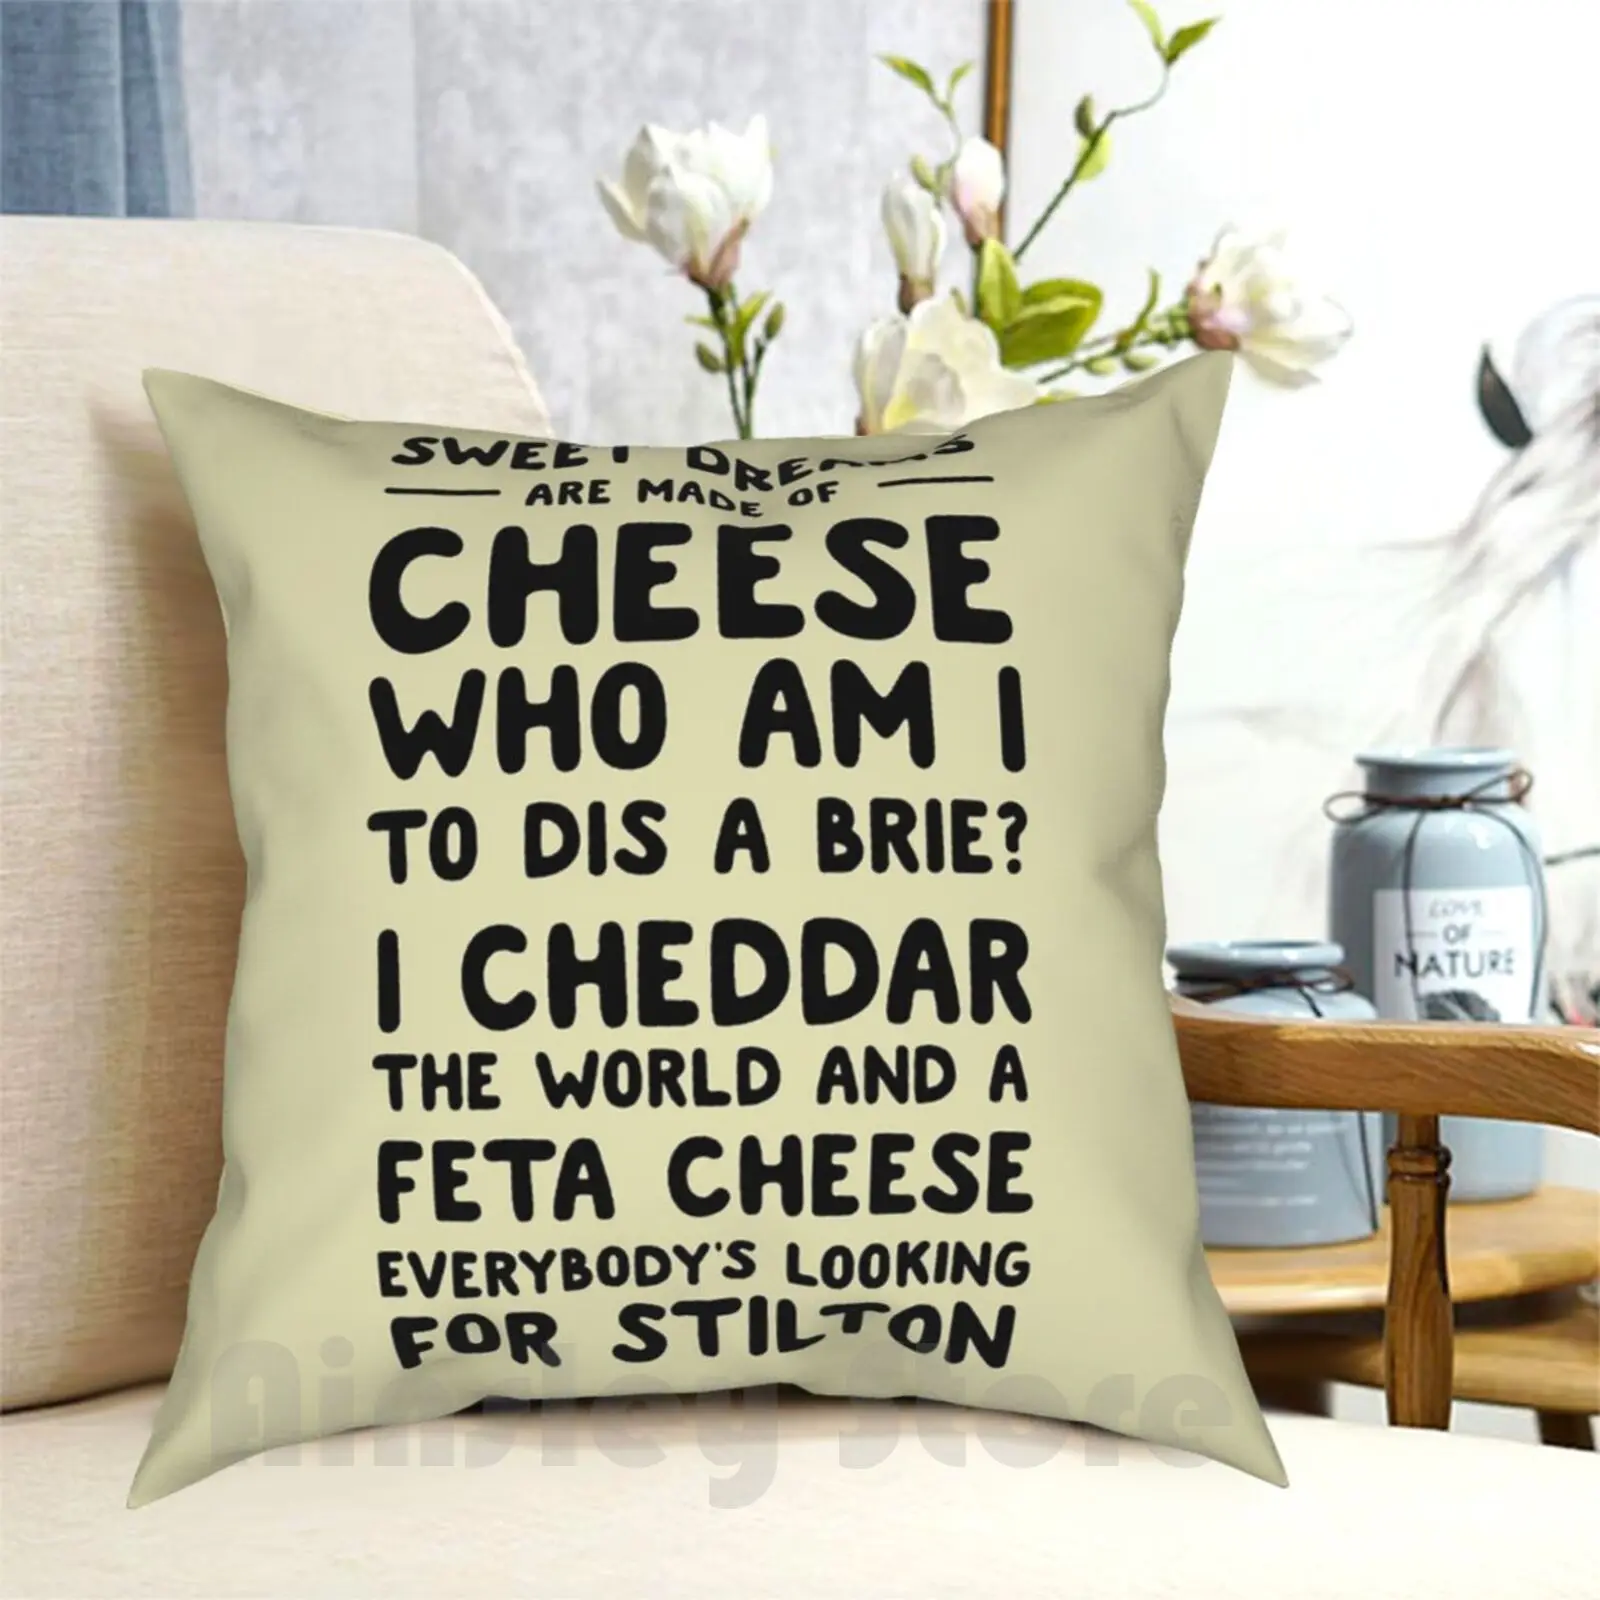 Delicious Coagulated Milk Cheese Funny Sweet Dreams are Made Brie Cheese Throw Pillow Multicolor 18x18